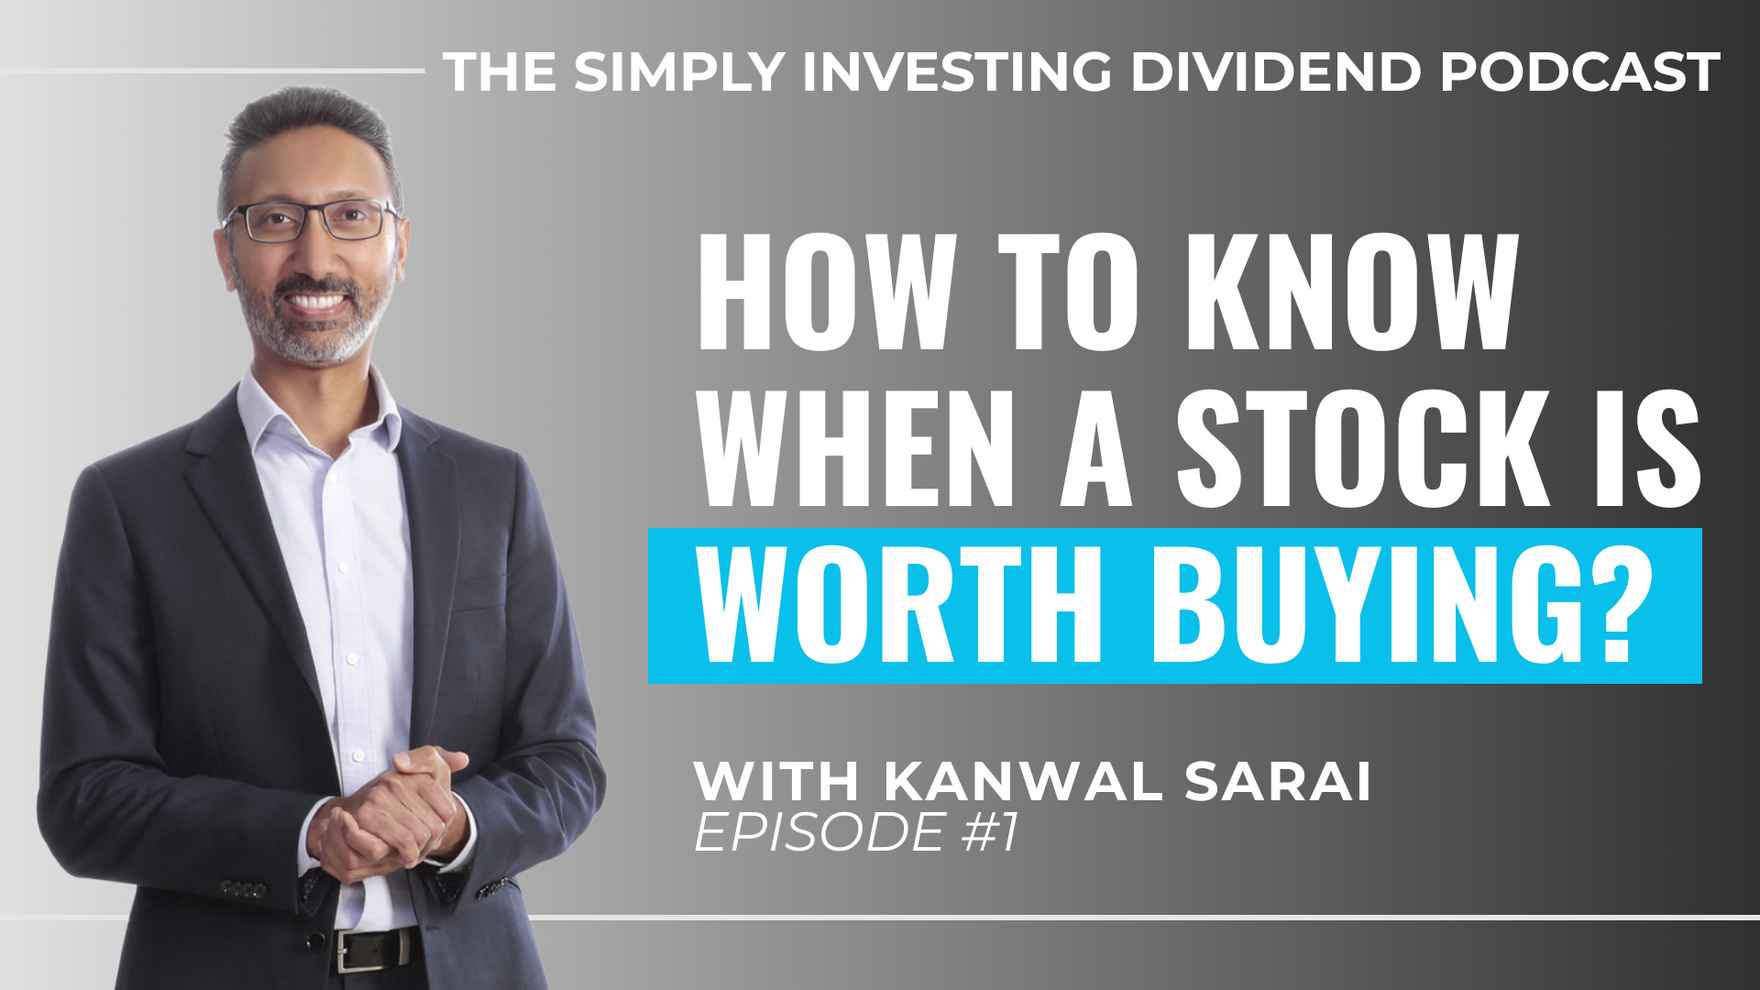 Simply Investing Dividend Podcast Episode 1 - How to Know When a Stock is Worth Buying